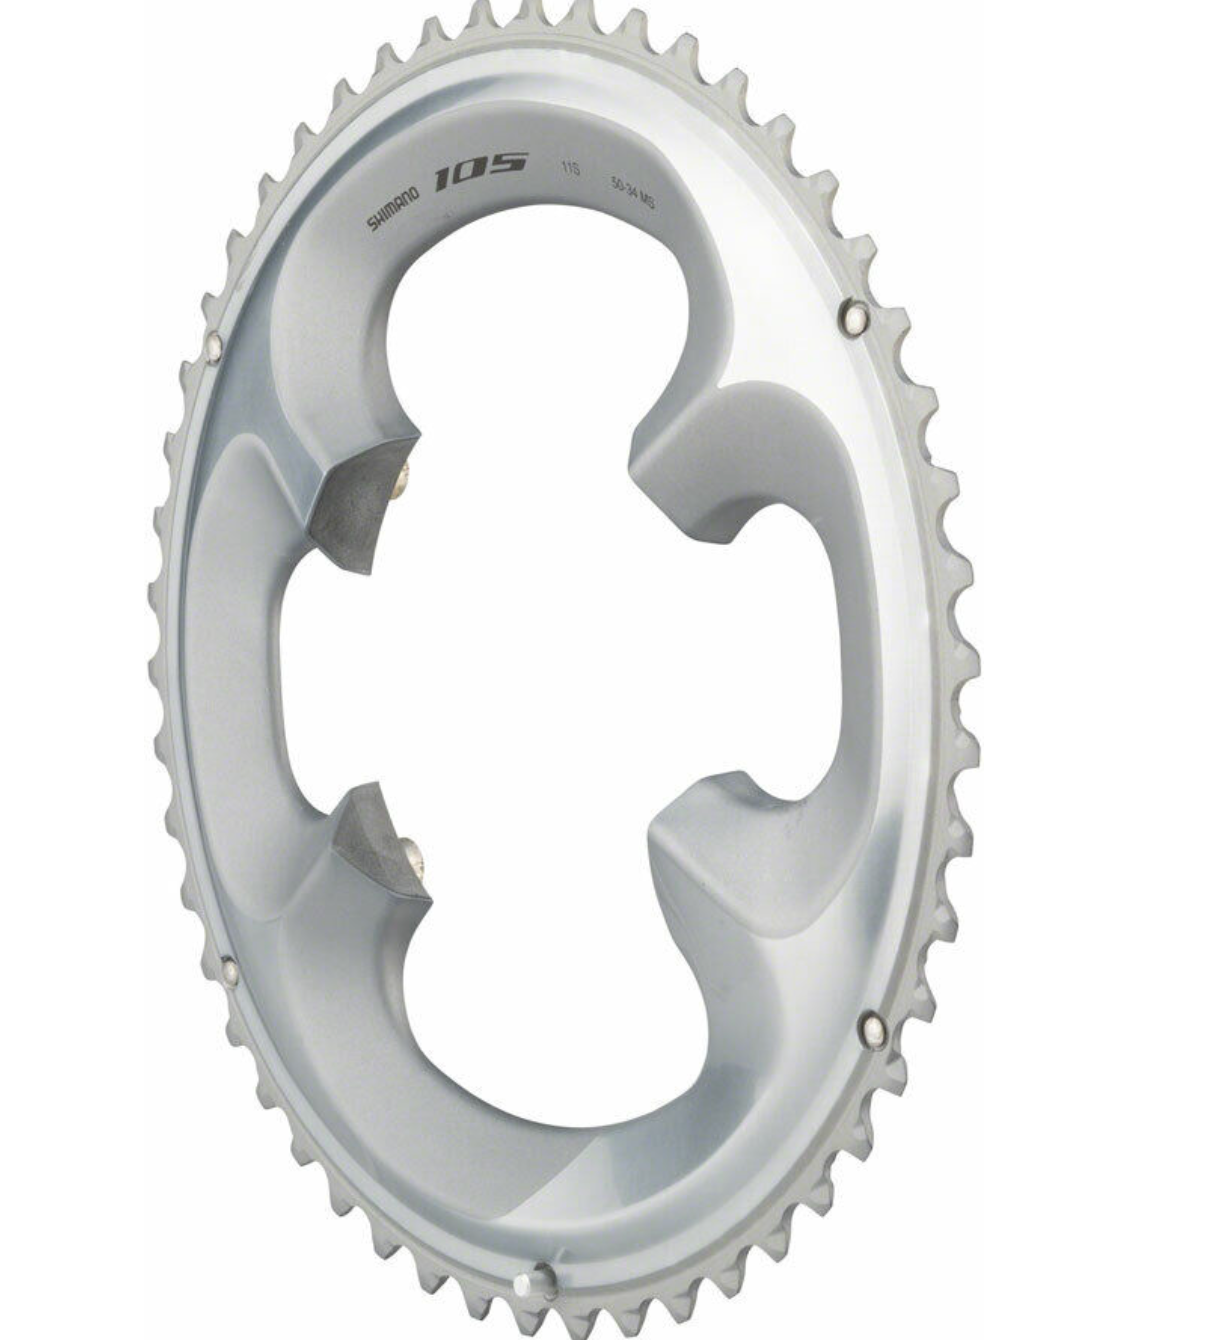 SHIMANO - 105 CHAINRING 50T 110BCD FOR 2x11 SPD